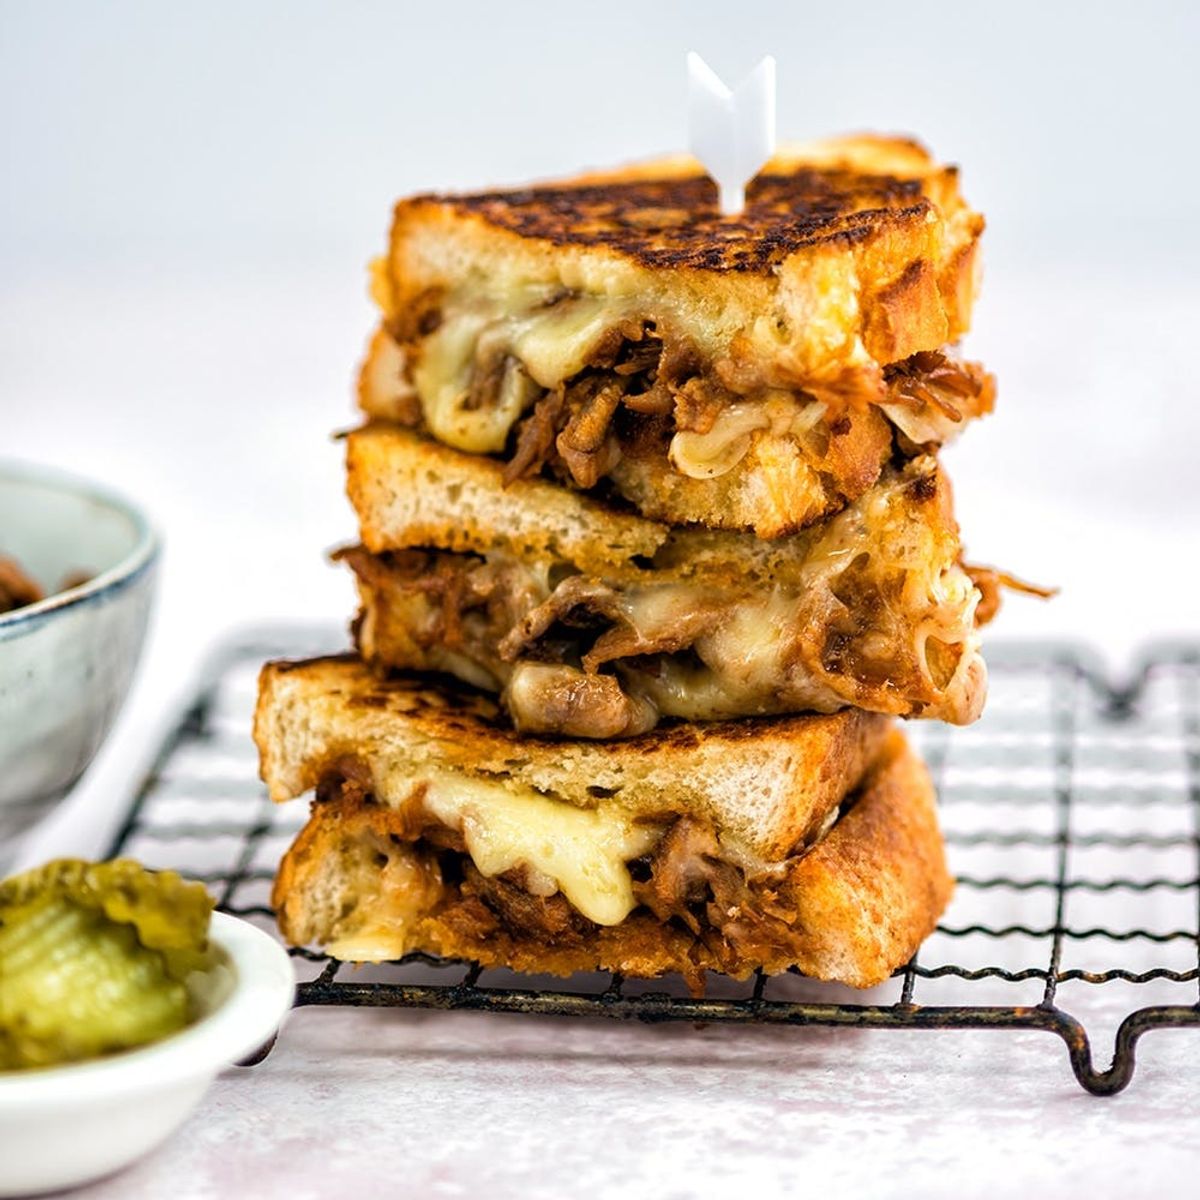 This Pulled Pork Grilled Cheese Sandwich Is the Ultimate Father’s Day Recipe